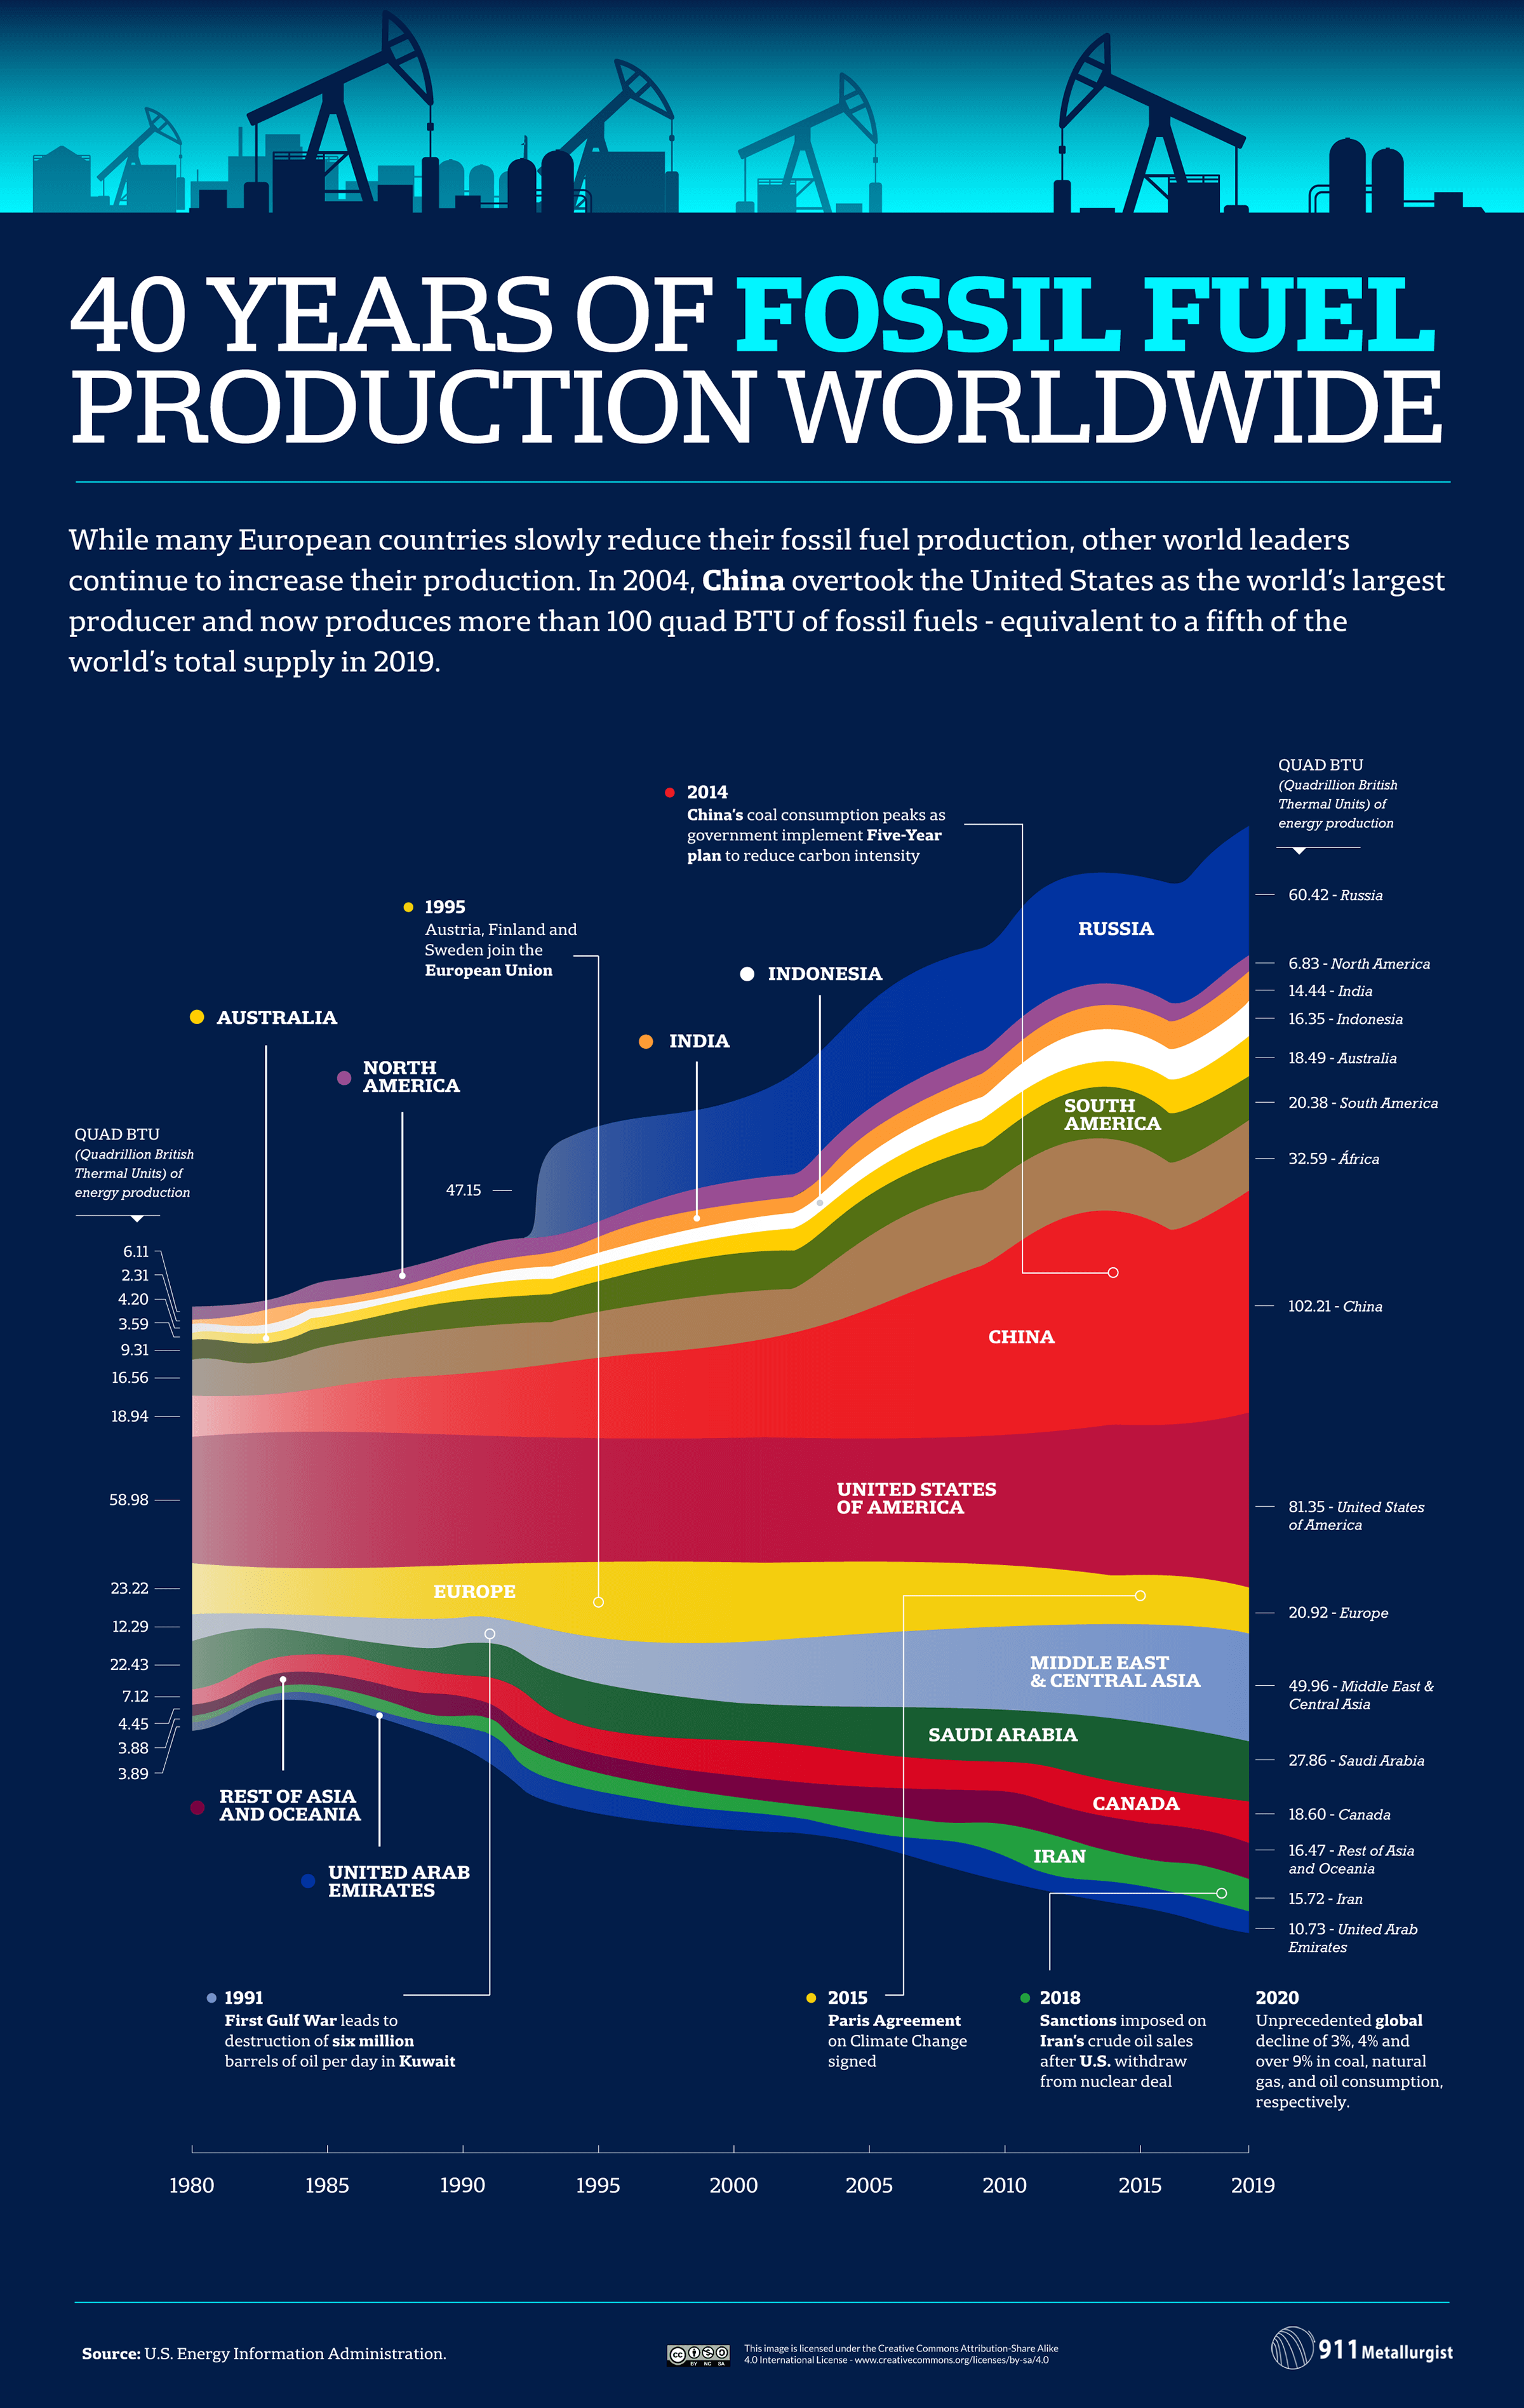 40 years of fossil fuel production worldwide visualized